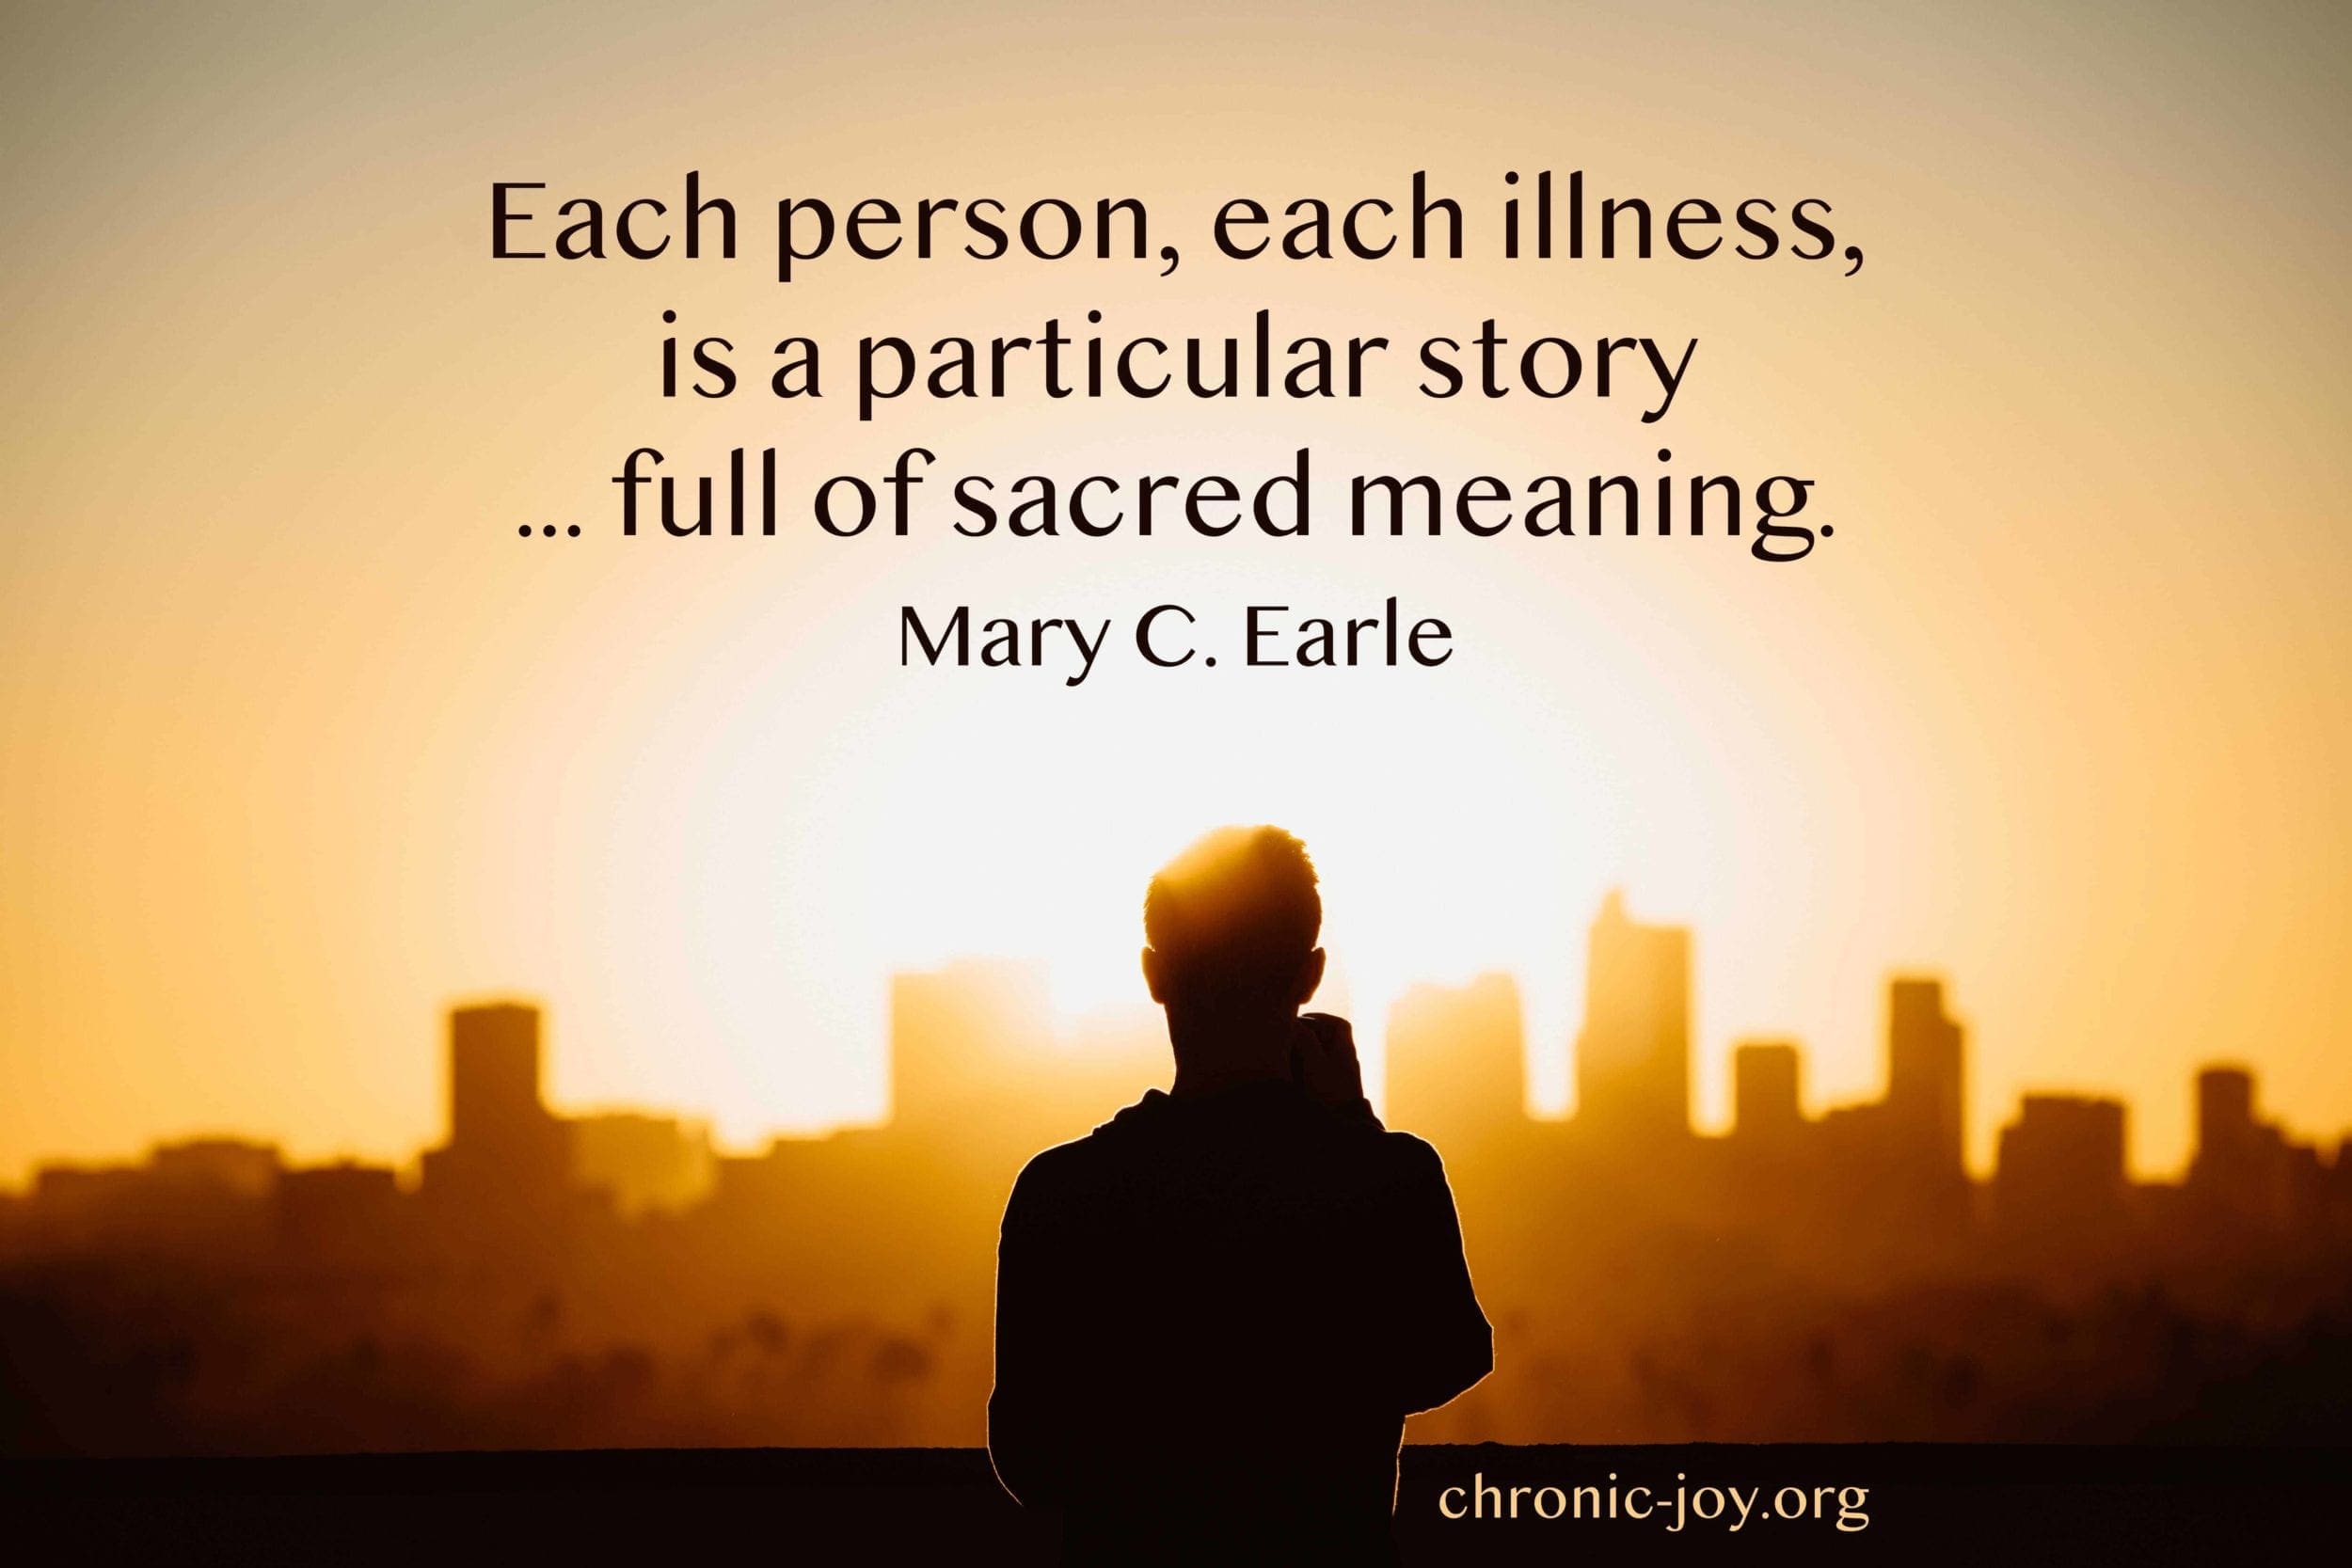 "Each person, each illness, is a particular story … full of sacred meaning." Mary C. Earle